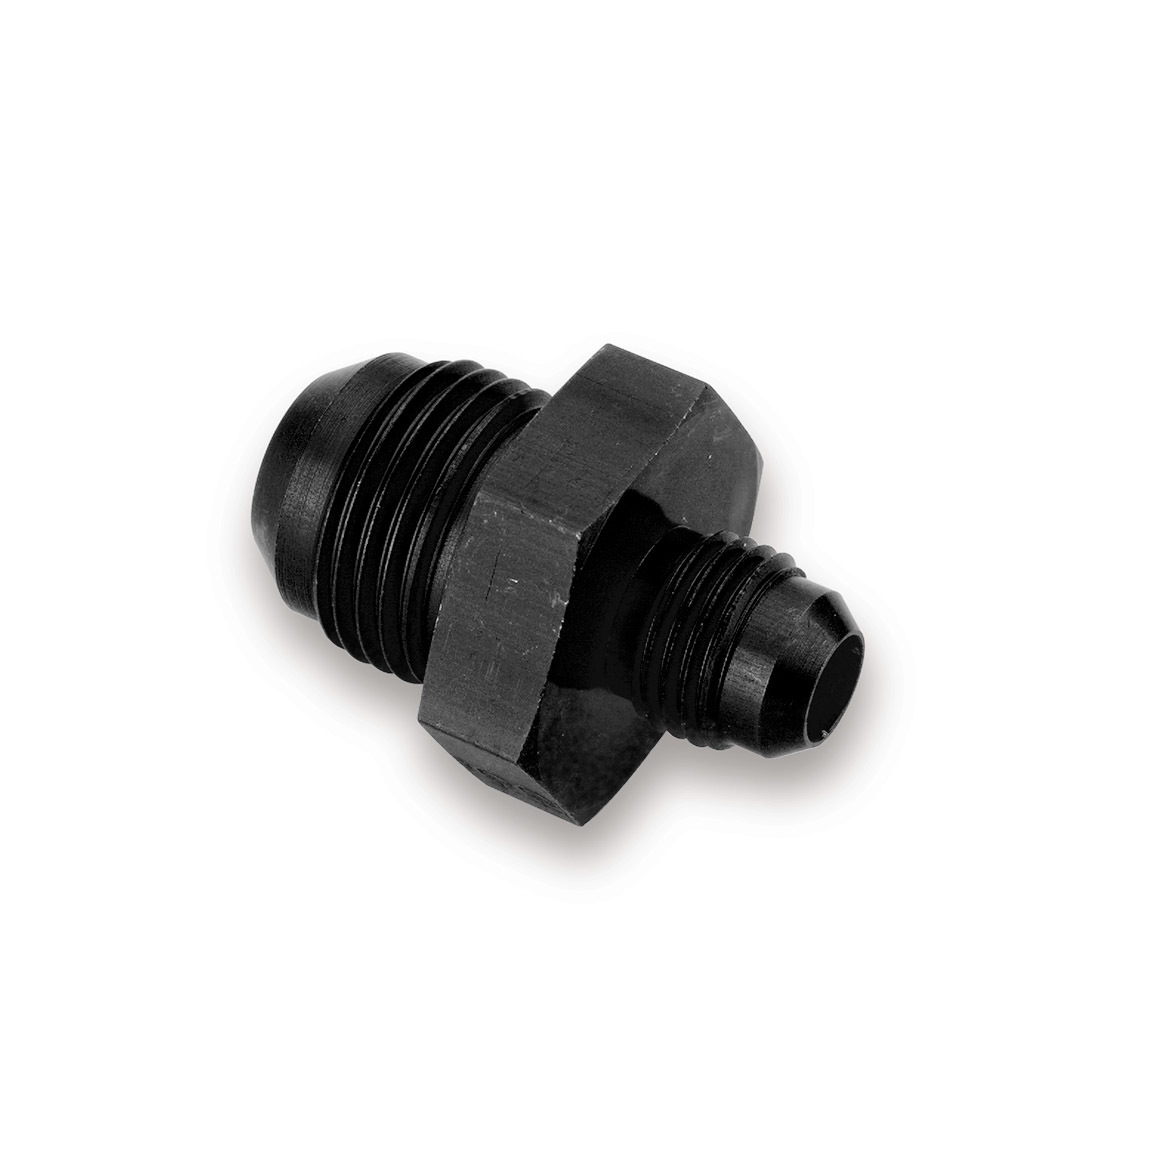 Earls AT991912ERL Fitting, Adapter, Straight, 8 AN Male to 6 AN Male, Aluminum, Black Anodized, Each